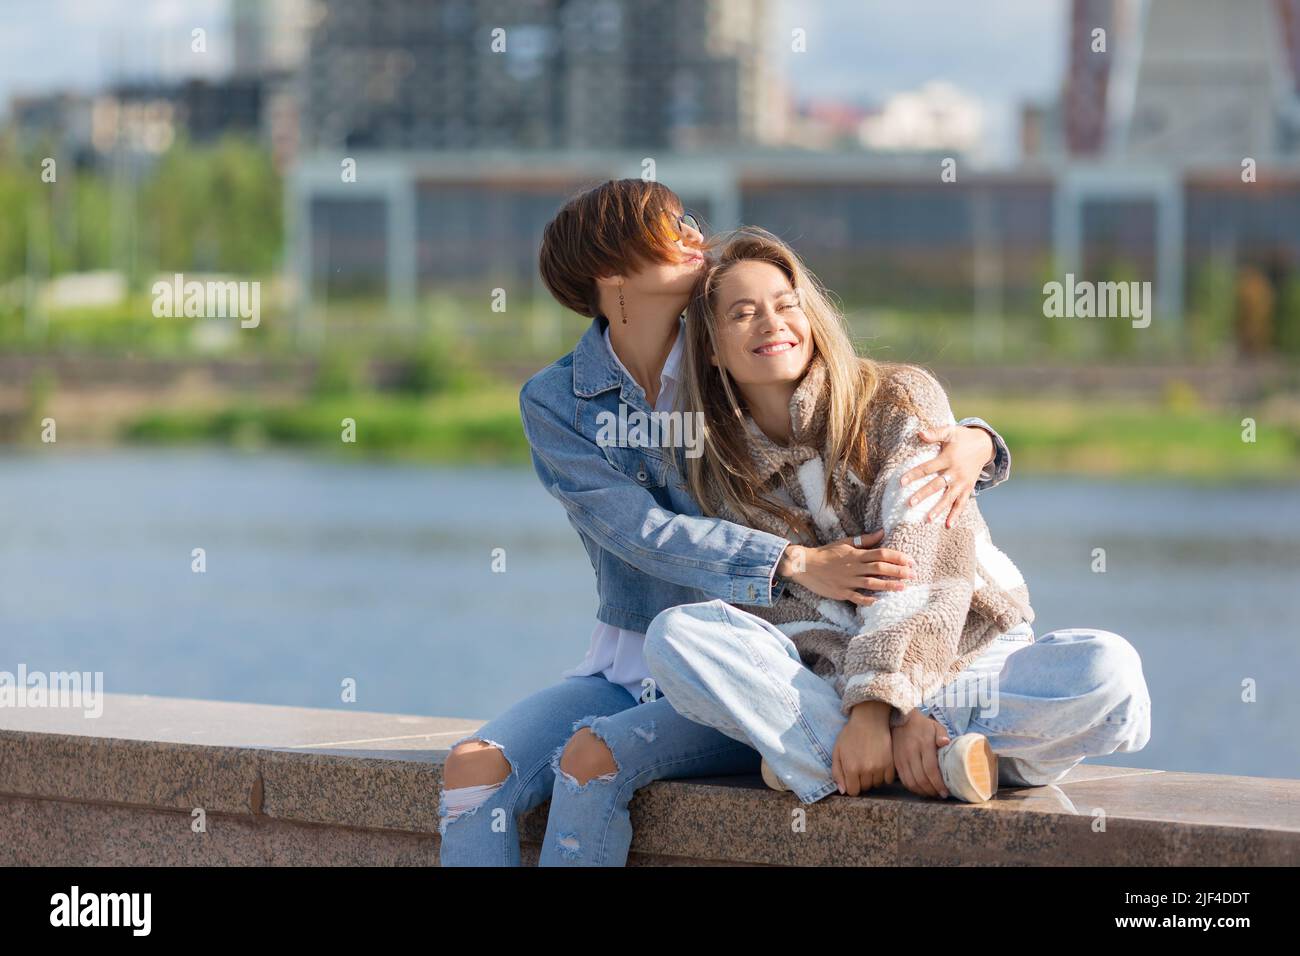 Love and relationships concept. Lesbian couple sit on the embankment and enjoy each other. Beautiful romantic moment between two female lovers. Stock Photo